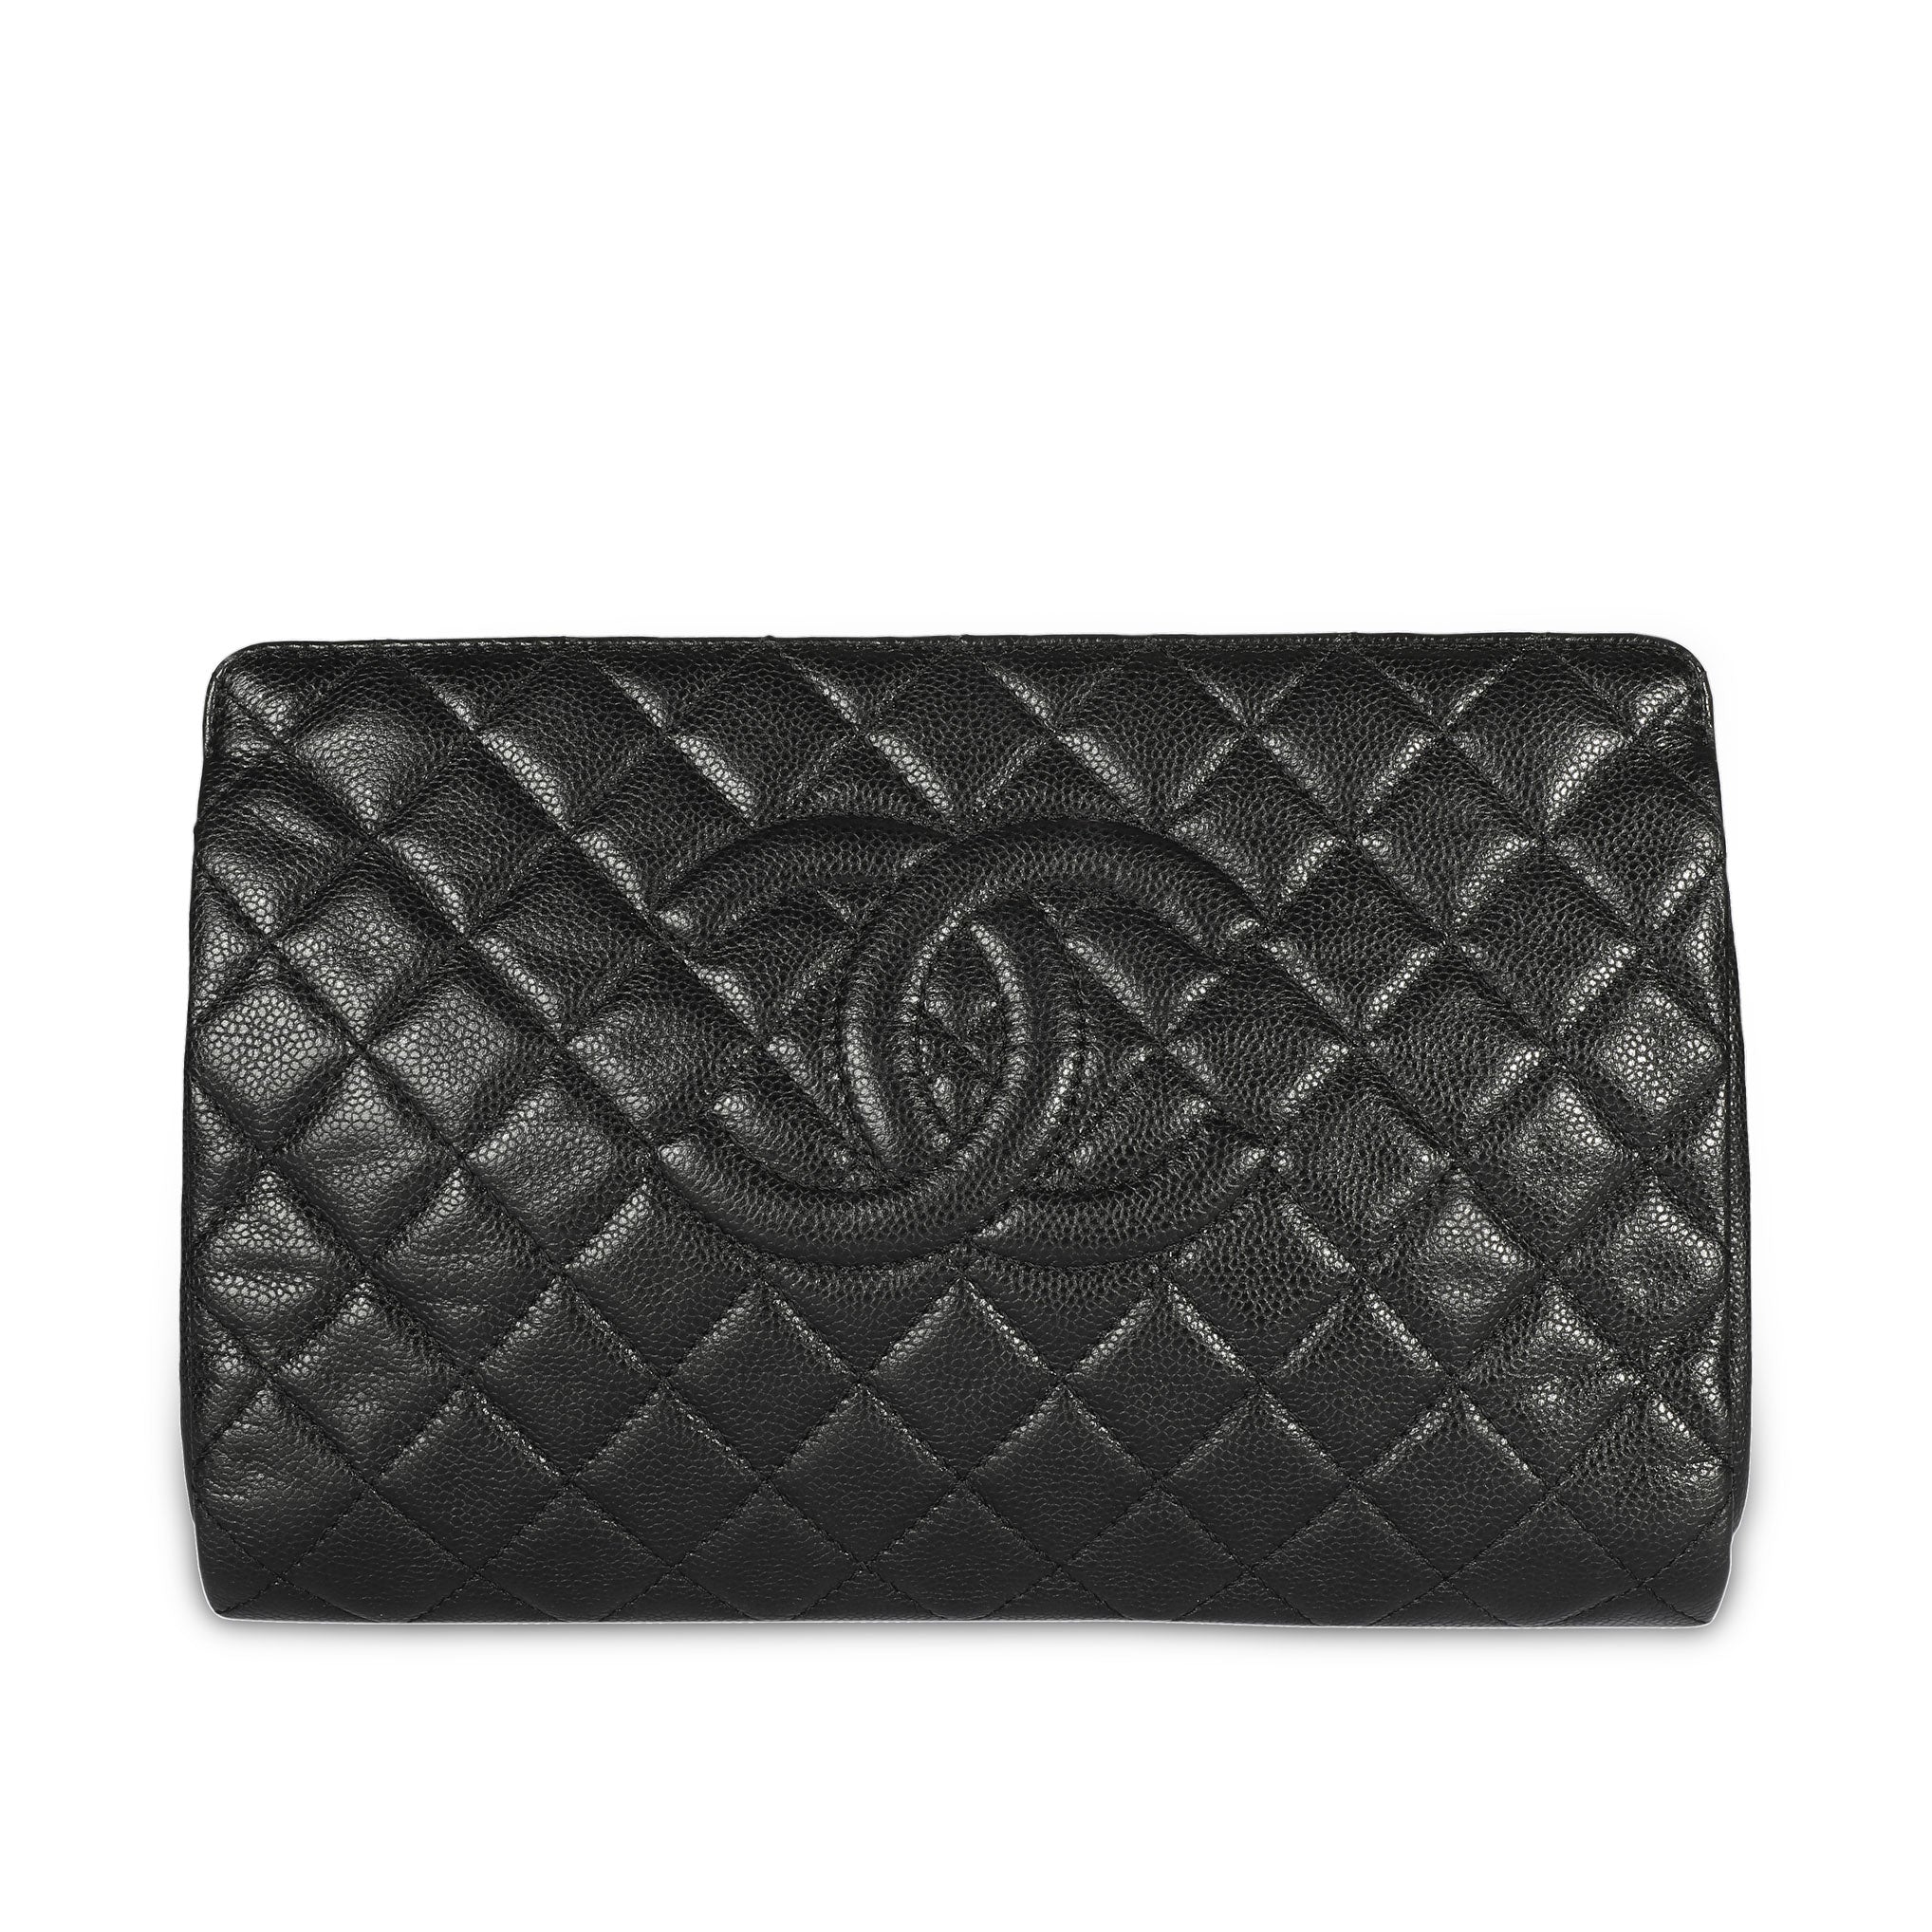 new authentic chanel hand bag